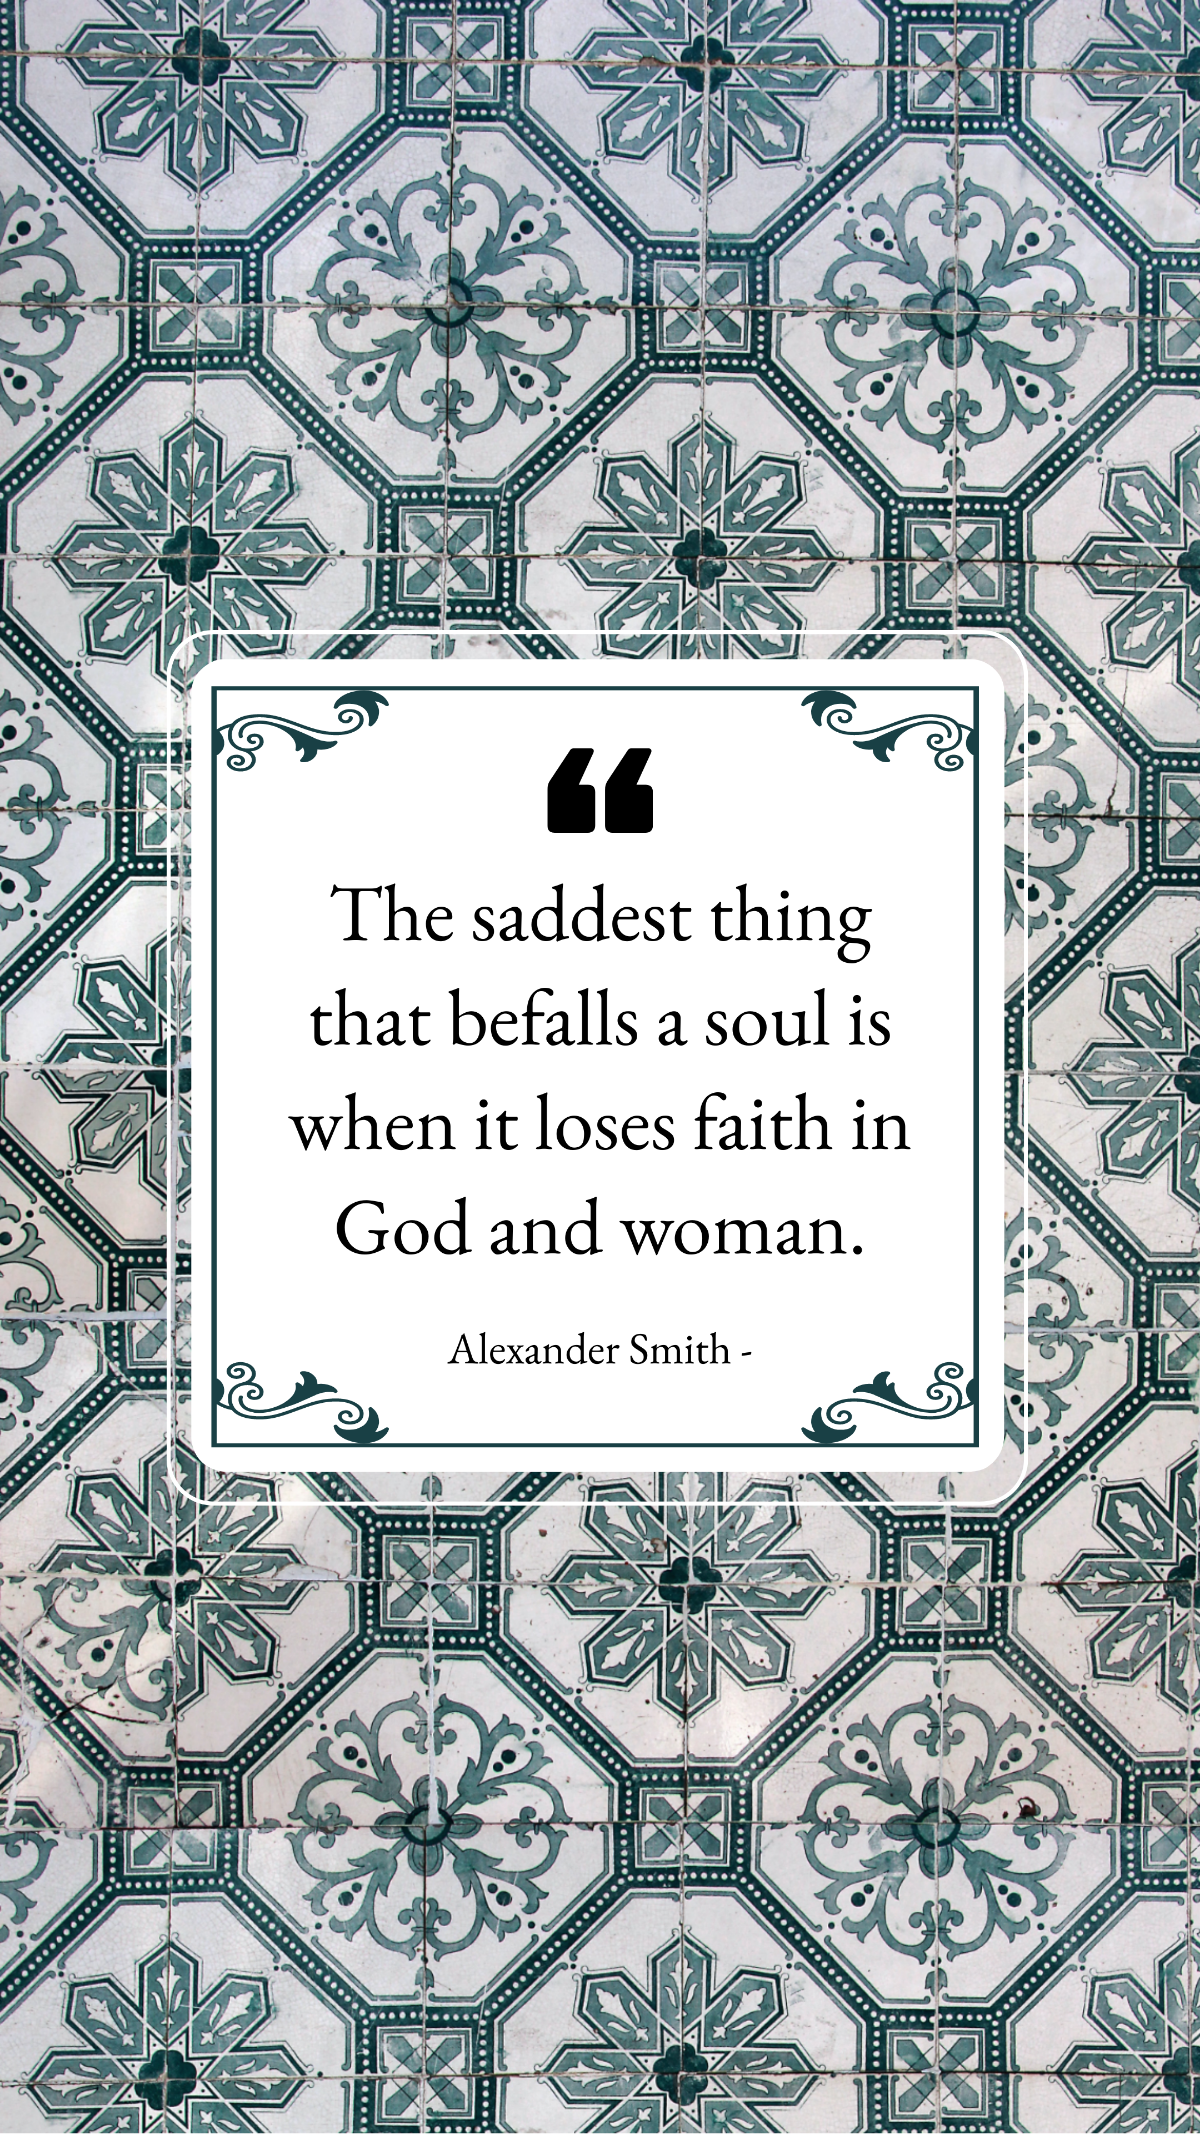 Alexander Smith - The saddest thing that befalls a soul is when it loses faith in God and woman. Template